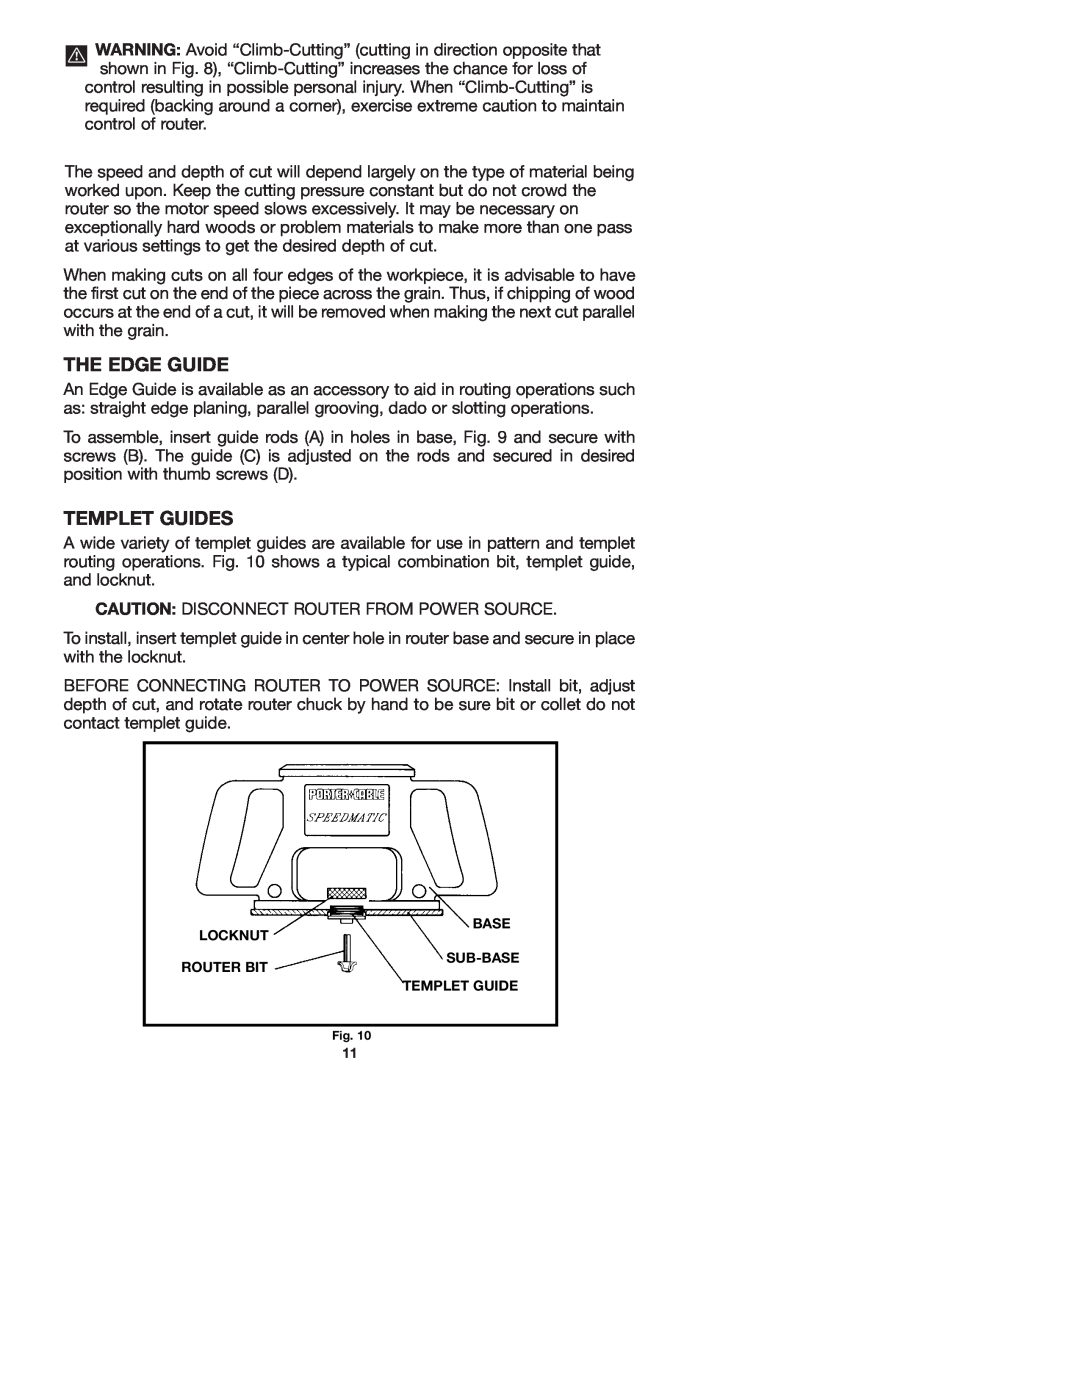 Porter-Cable 7536 instruction manual The Edge Guide, Templet Guides 